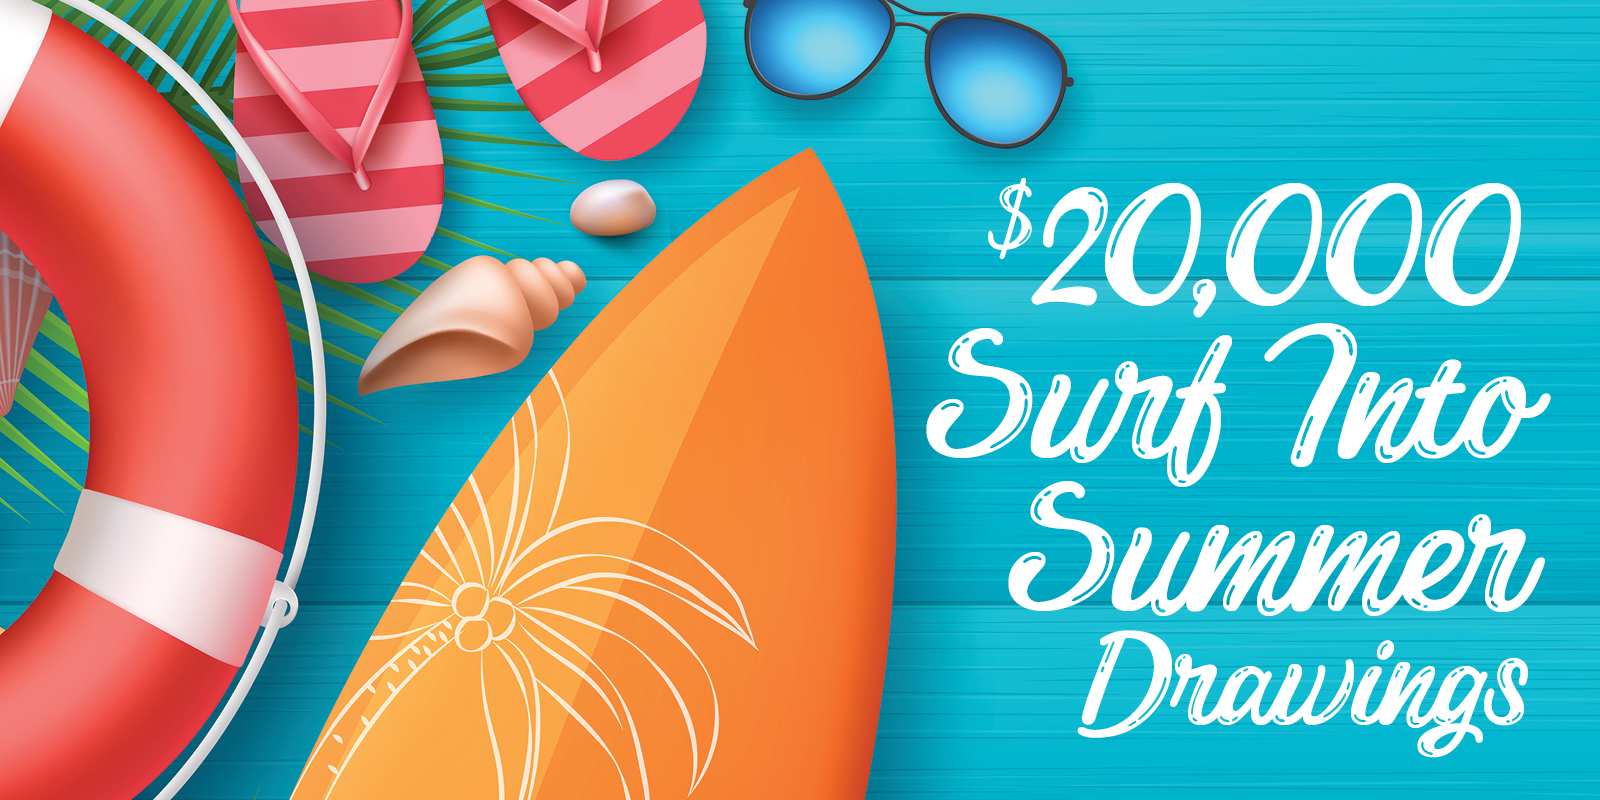 $20,000 Surf Into Summer Drawings - creative has image of a sunglasses, sandals, floatie and surfboard